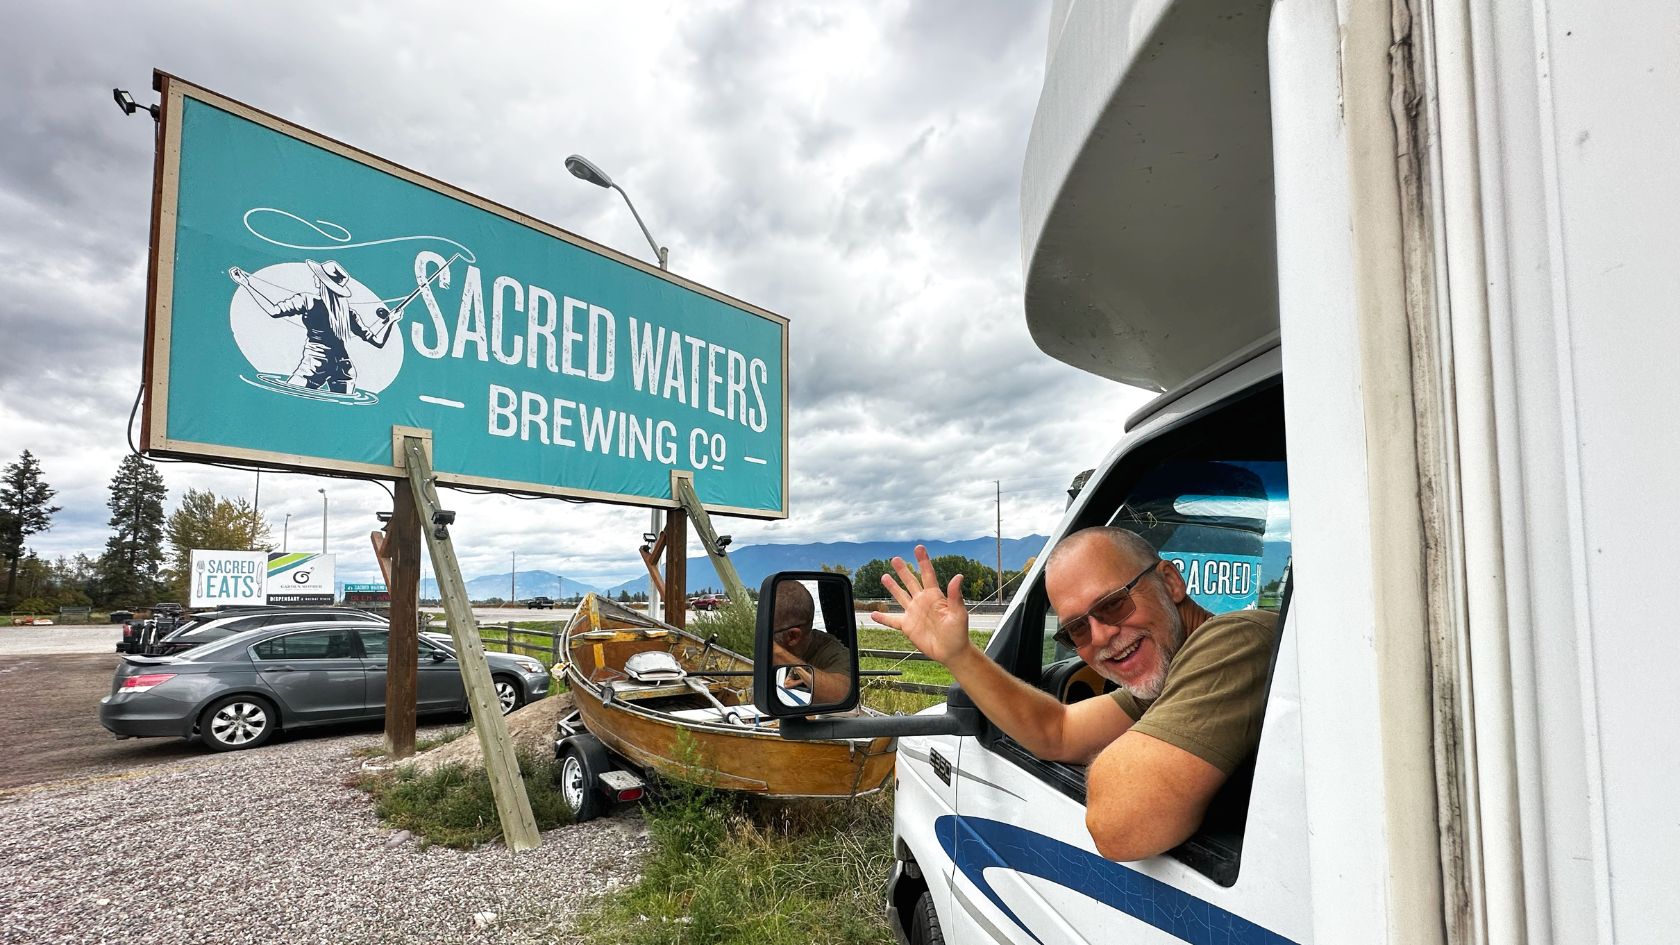 Sacred Waters Brewing Co: Beer and Adventure for the Wild Ones